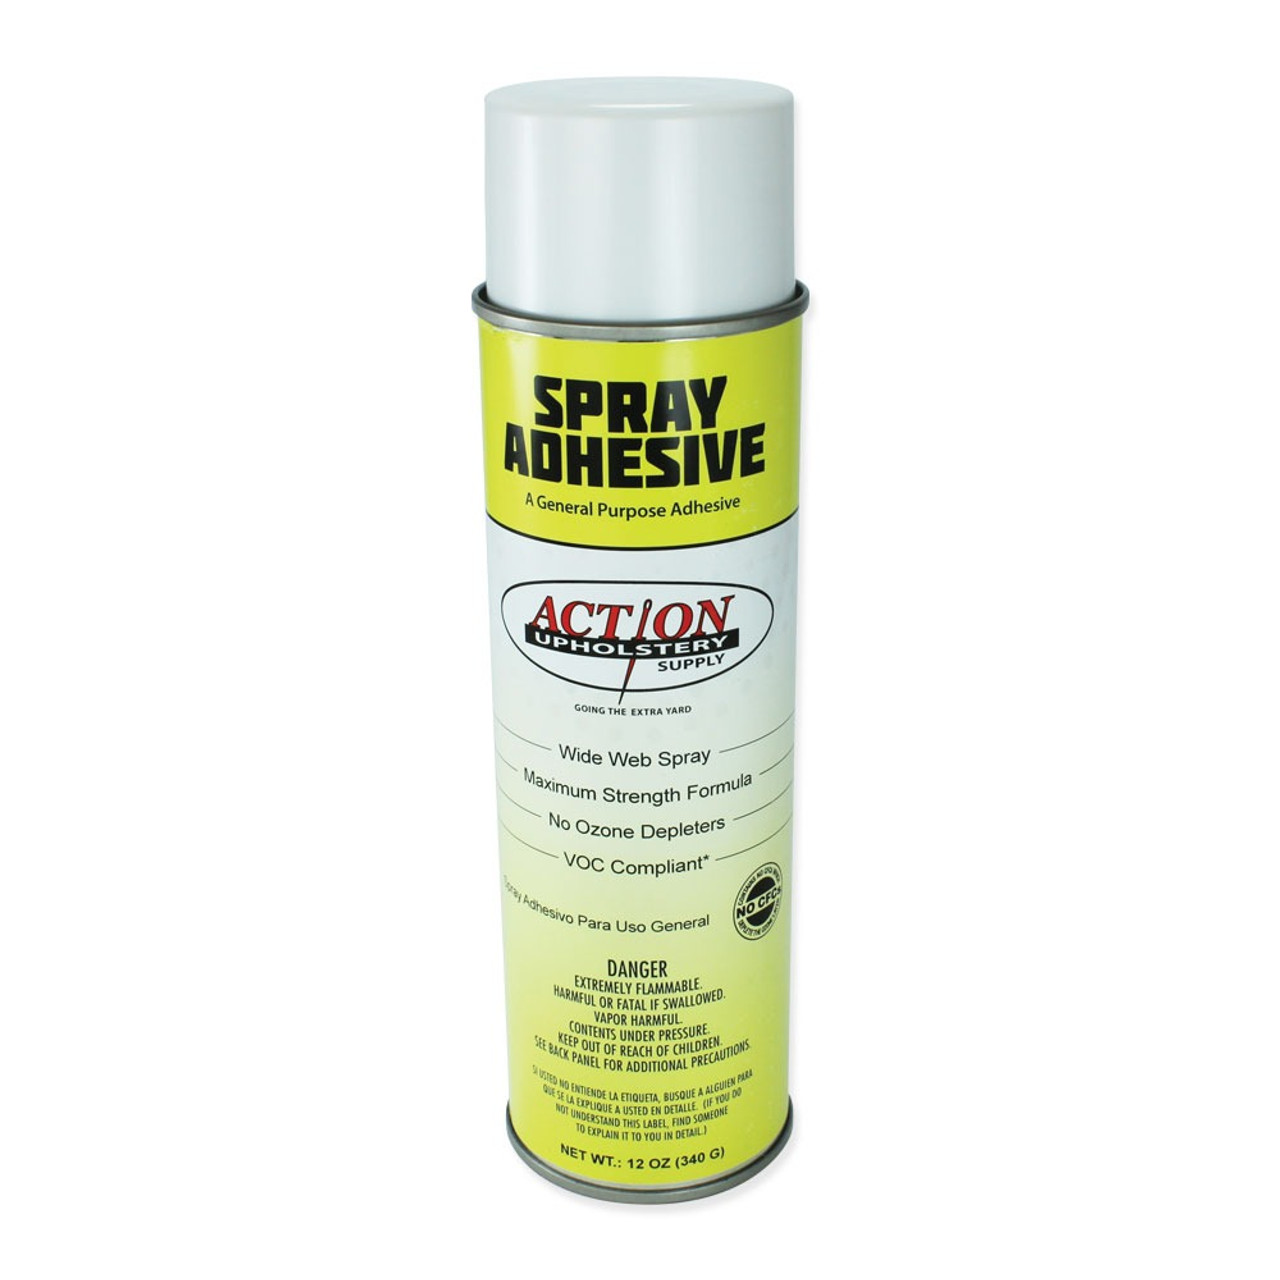  General Upholstery Web Spray Glue Contact Adhesive